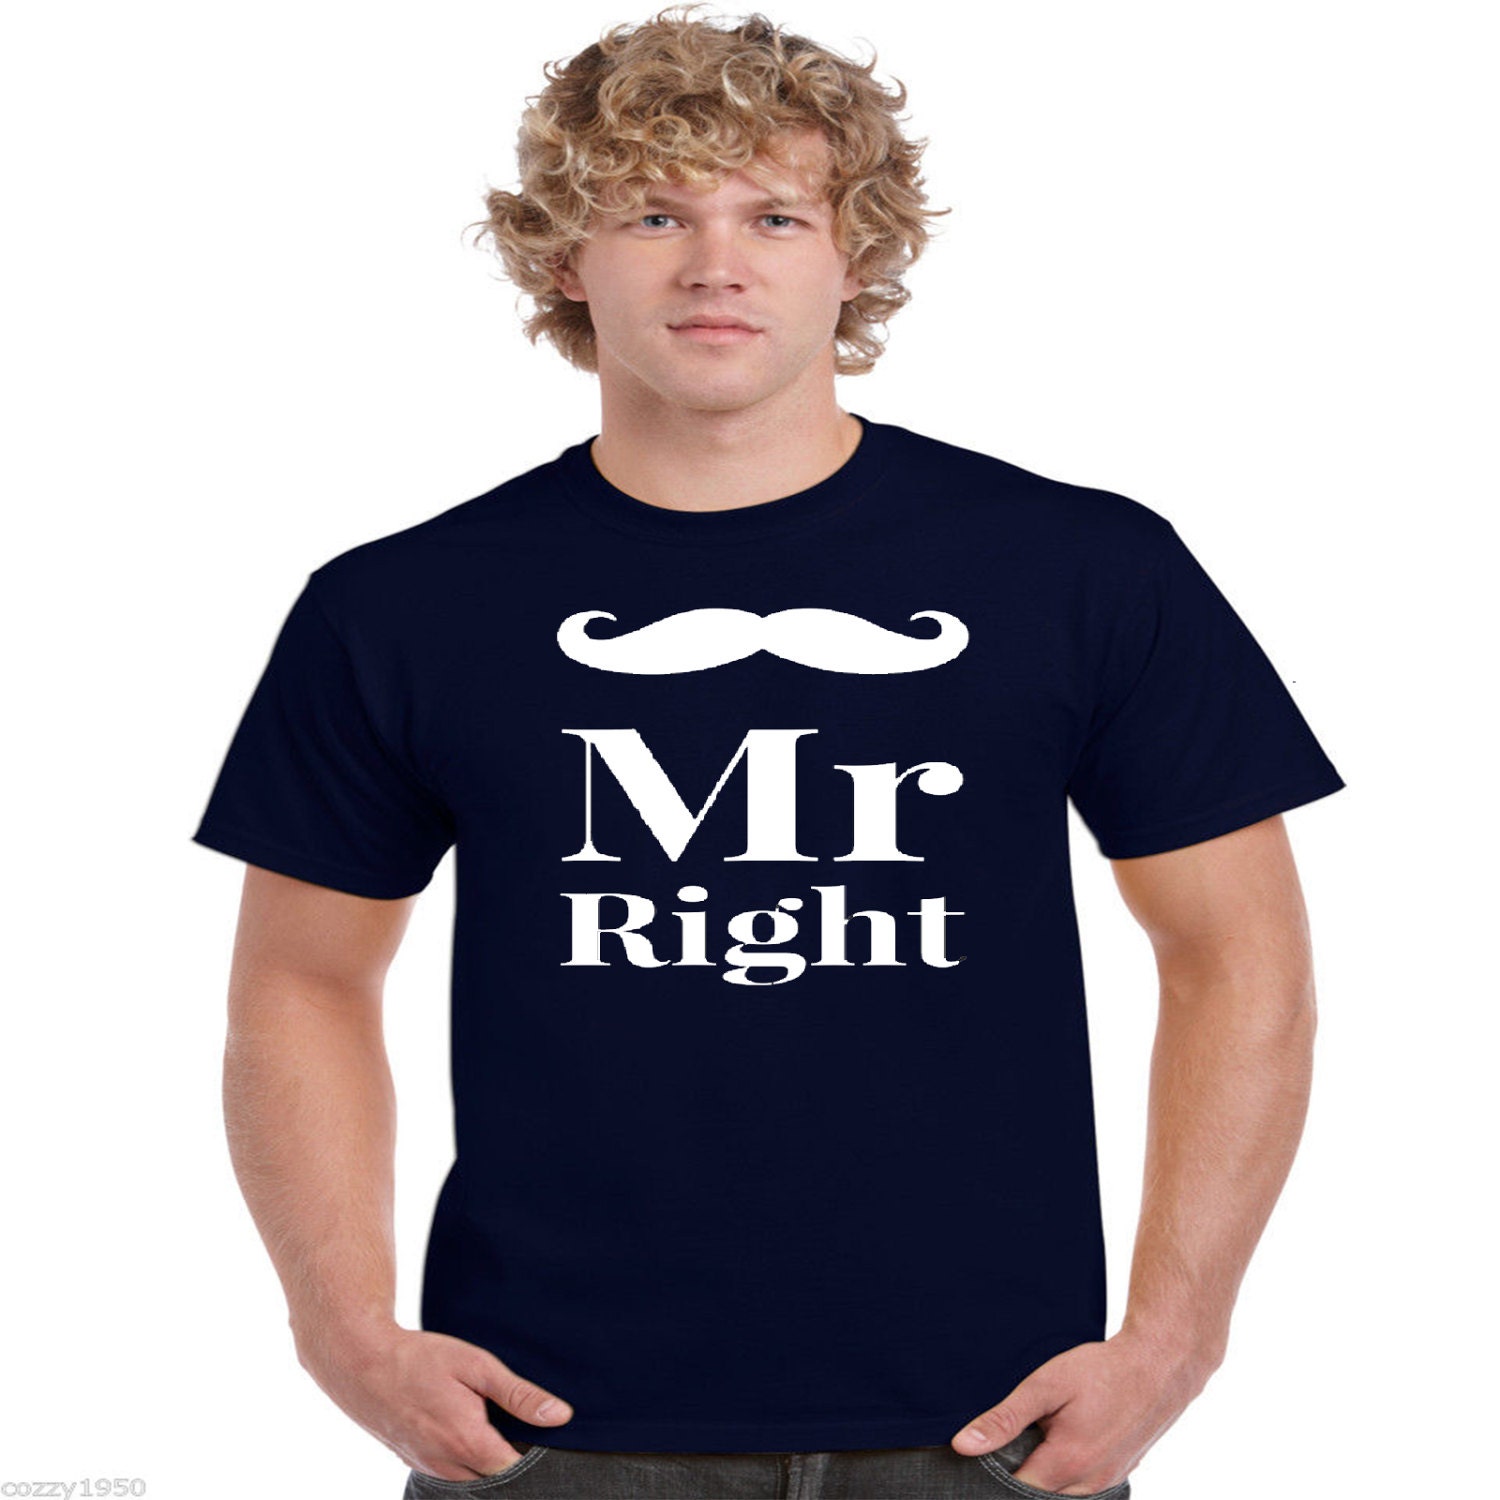 Mrs always right t-shirt Mr right t shirt wedding gifts